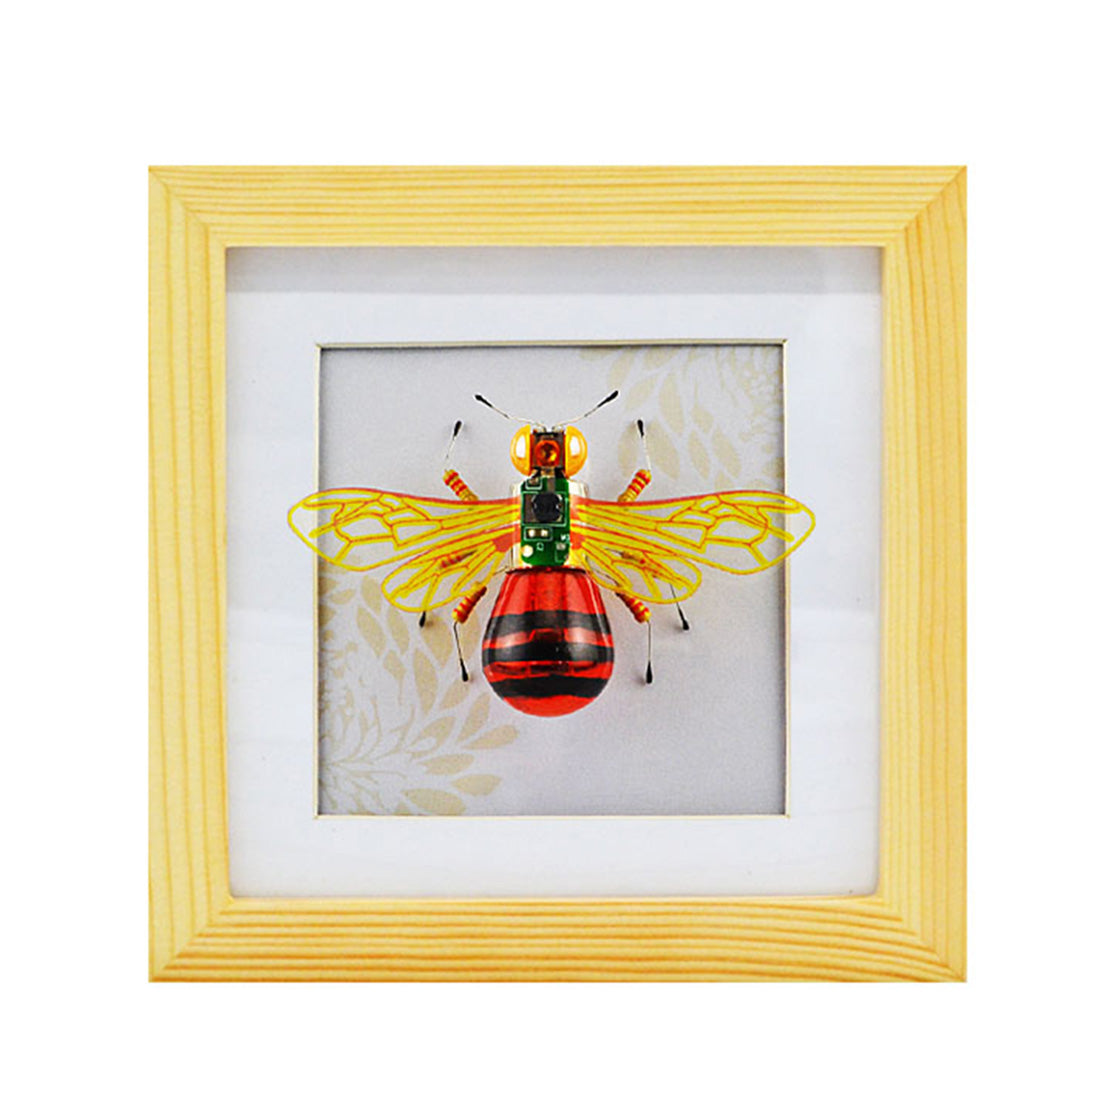 DIY Insect Model Handmade Worker Bee Home Decor Gift Toys 4 Pcs with Light